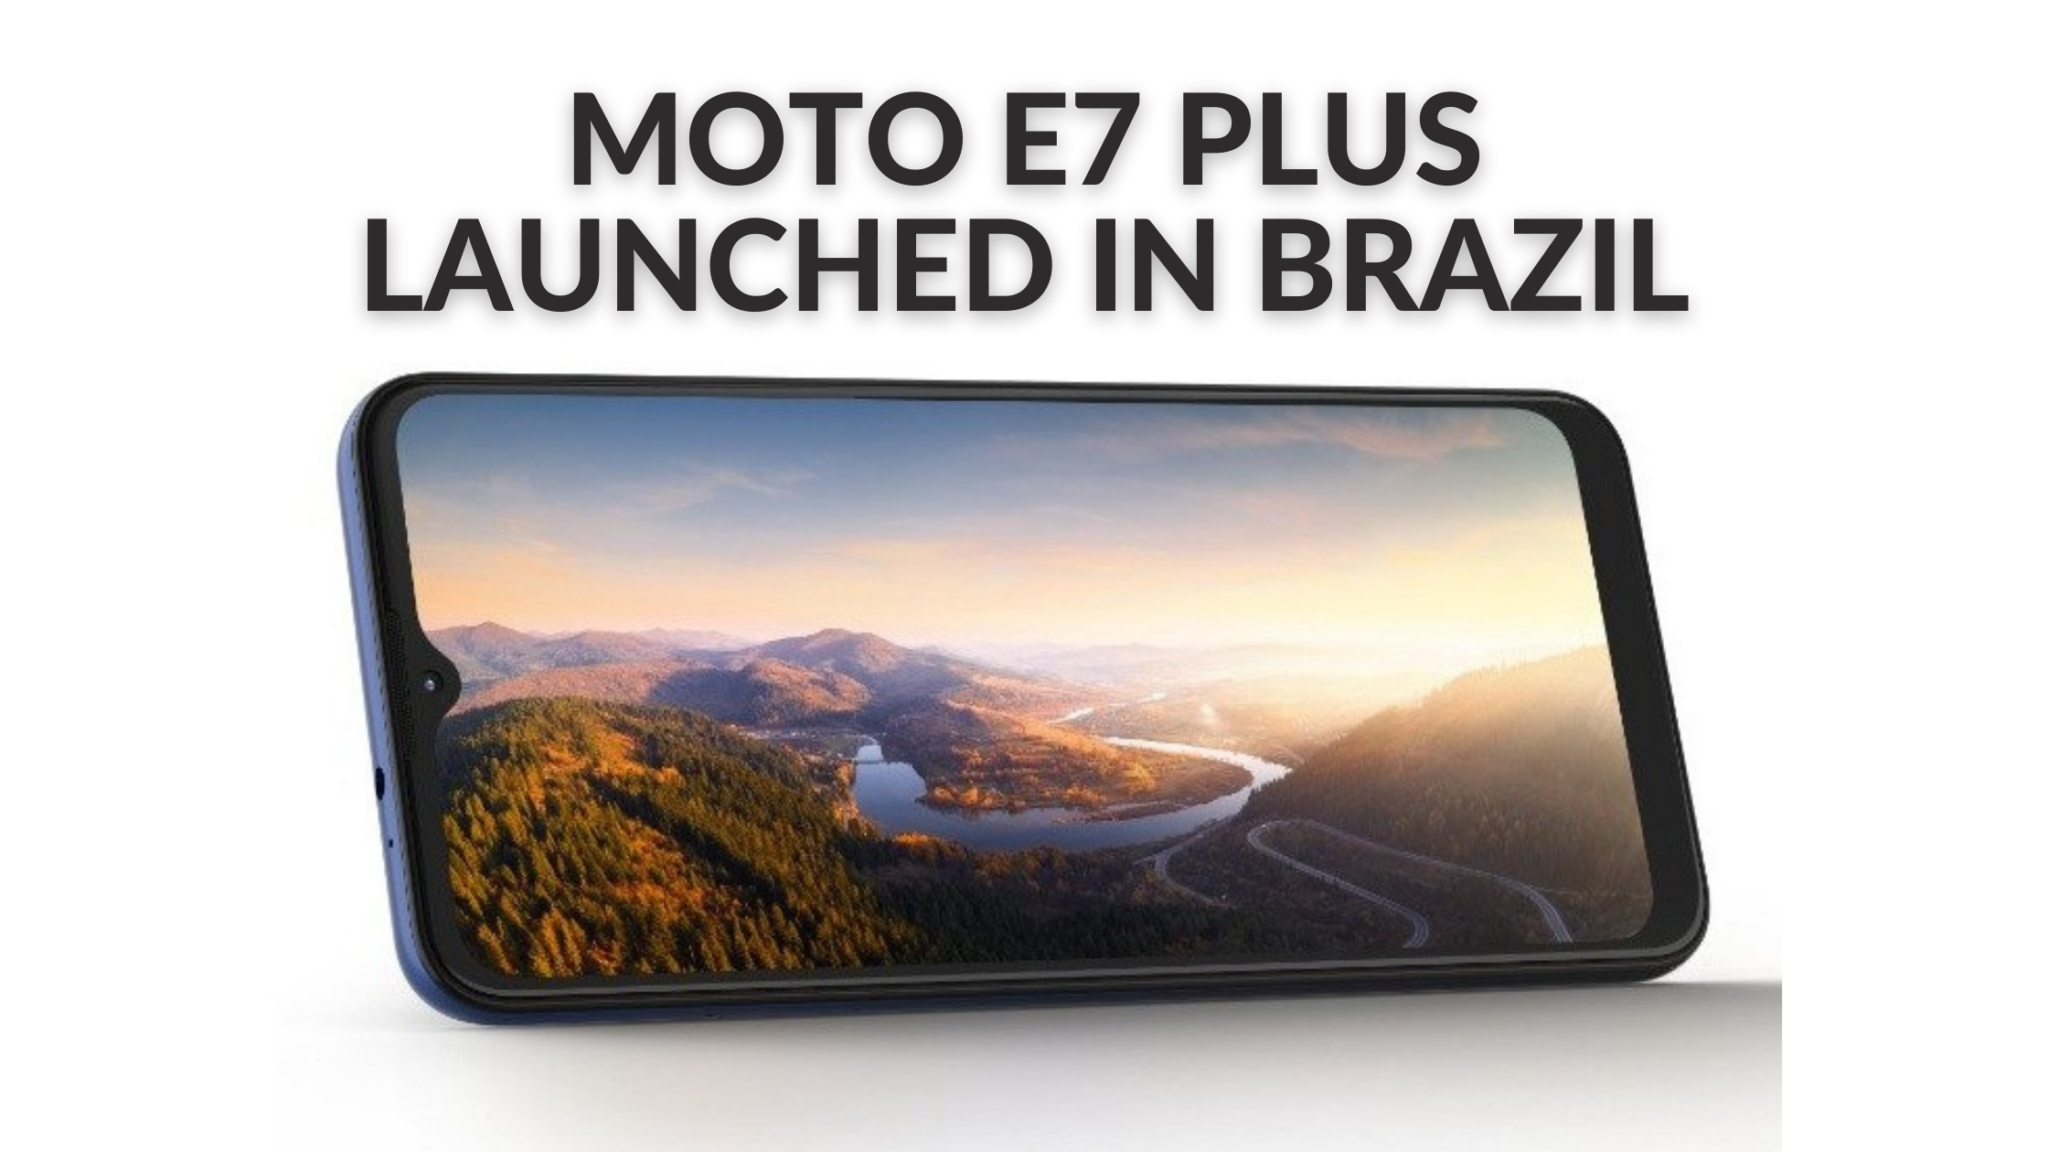 Moto E7 Plus launched in Brazil with Snapdragon 460